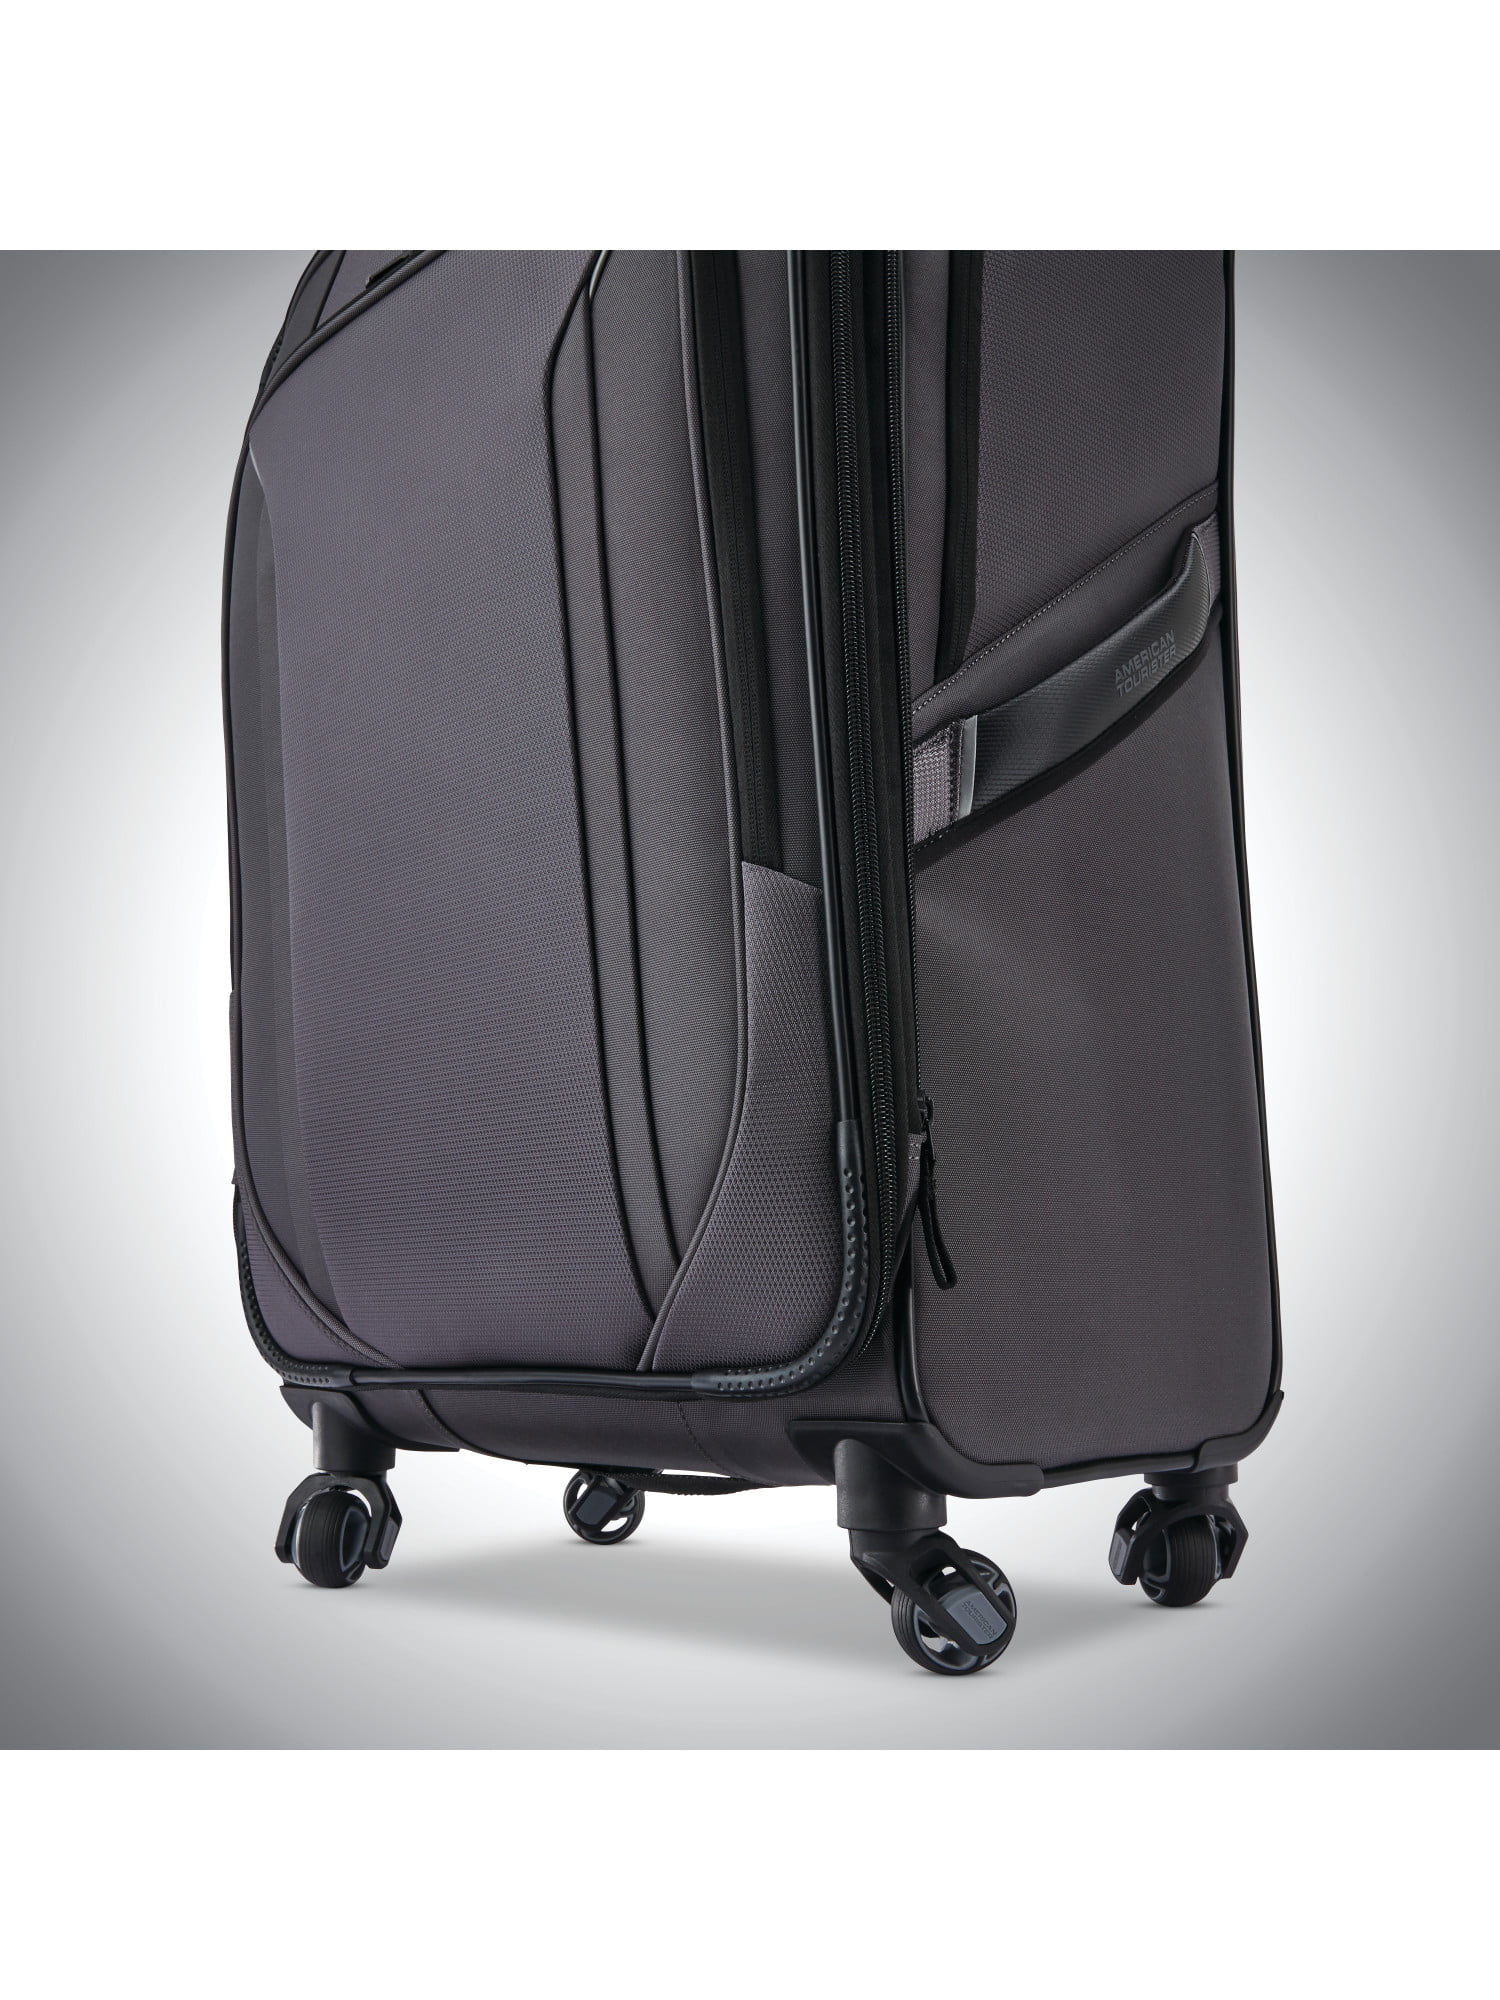 See more 100 Hot Carry On Luggage